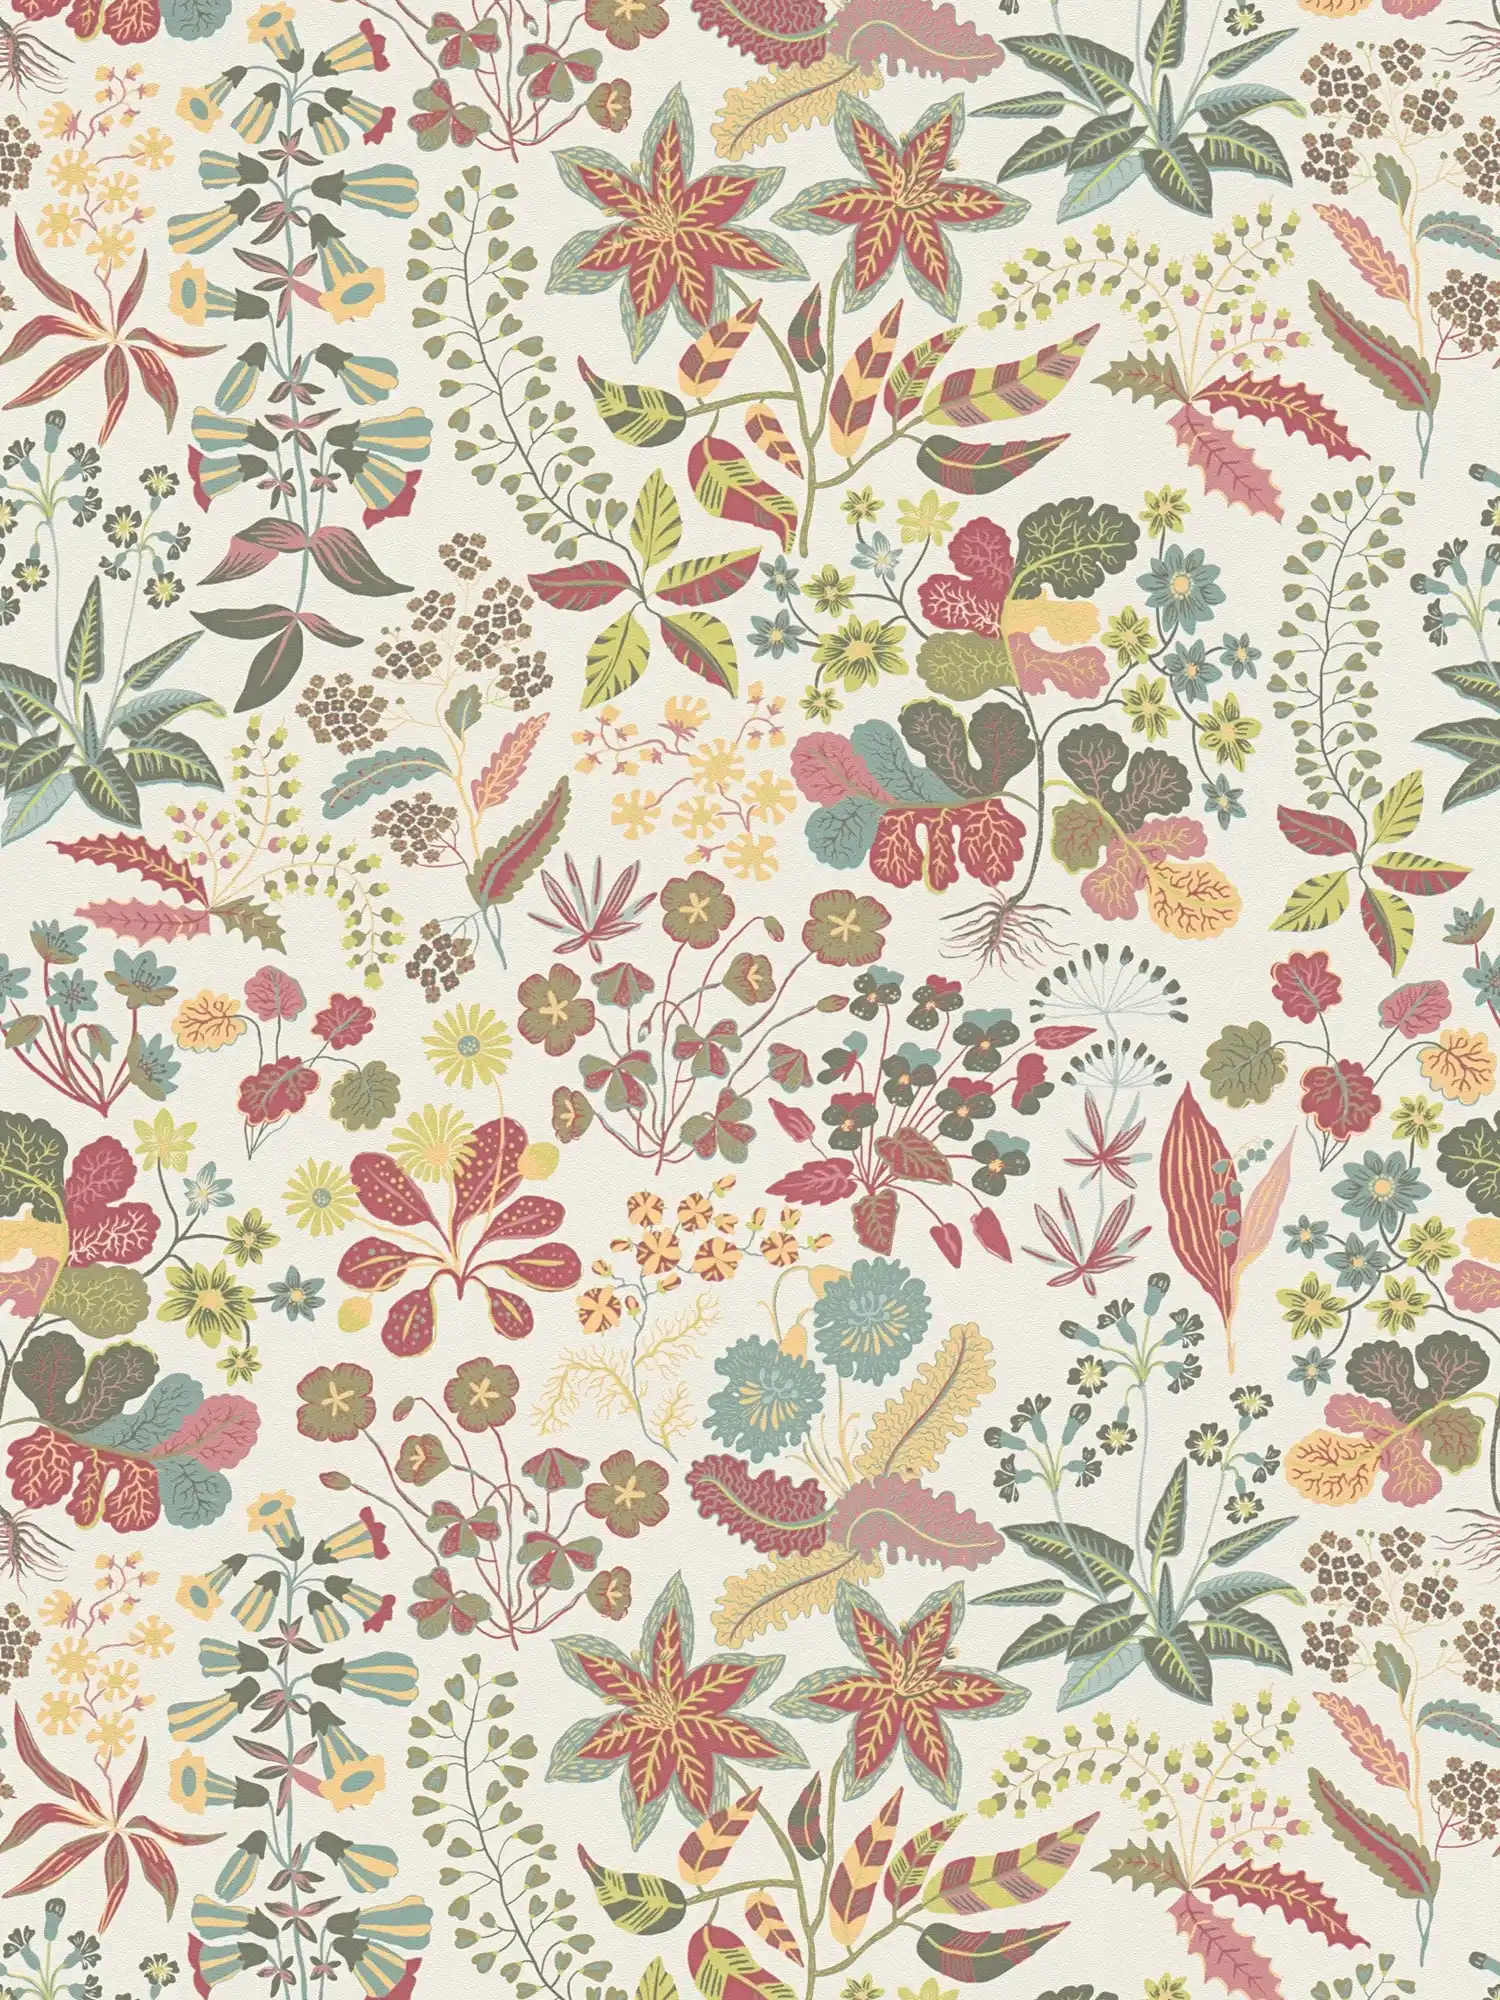 Floral wallpaper with detailed pattern - red, green, cream
